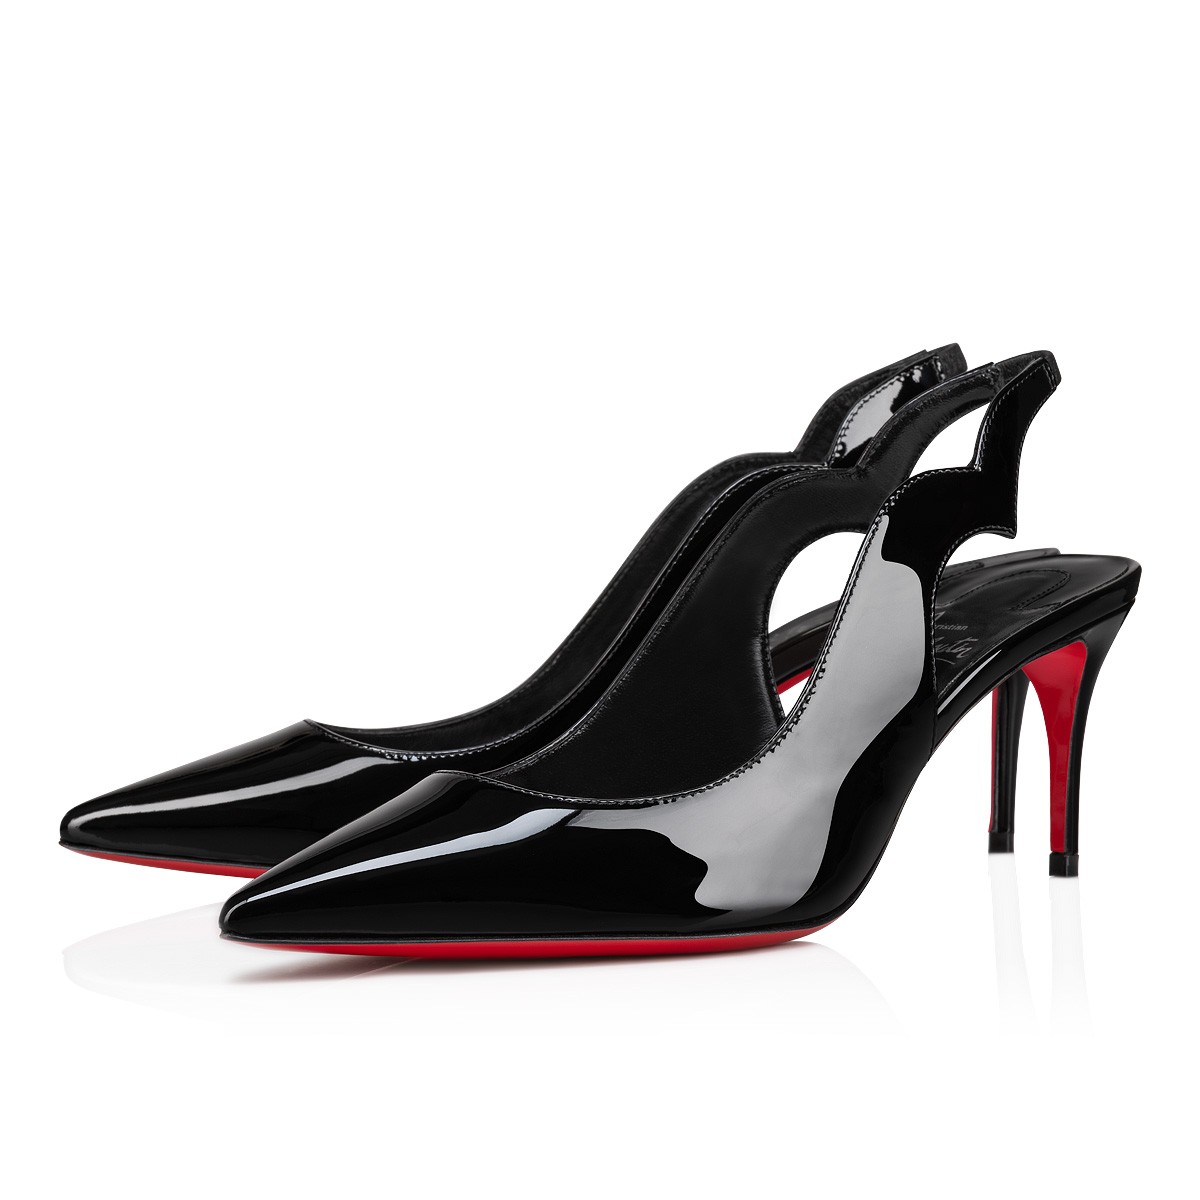 Hot Chick Sling 70 mm Black Patent Leather Pumps